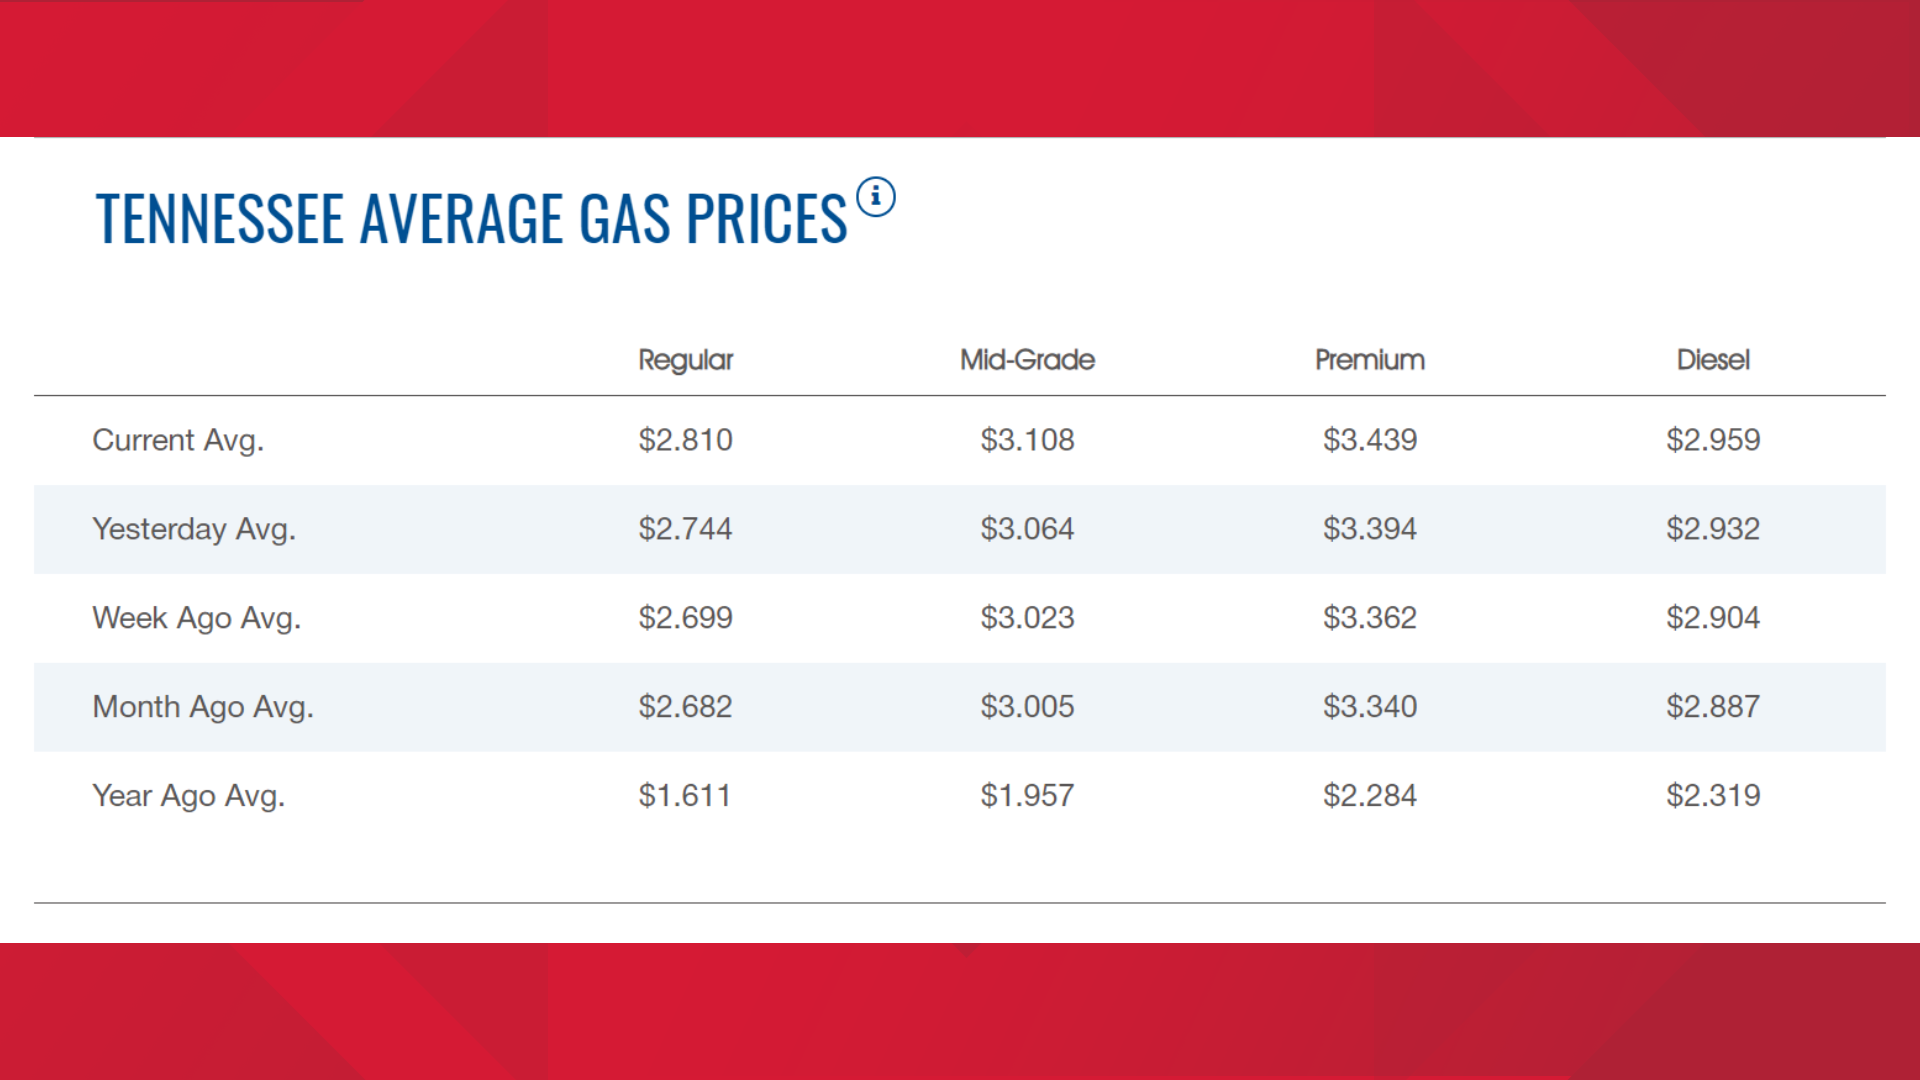 Tennessee gas prices up slightly but still below national average